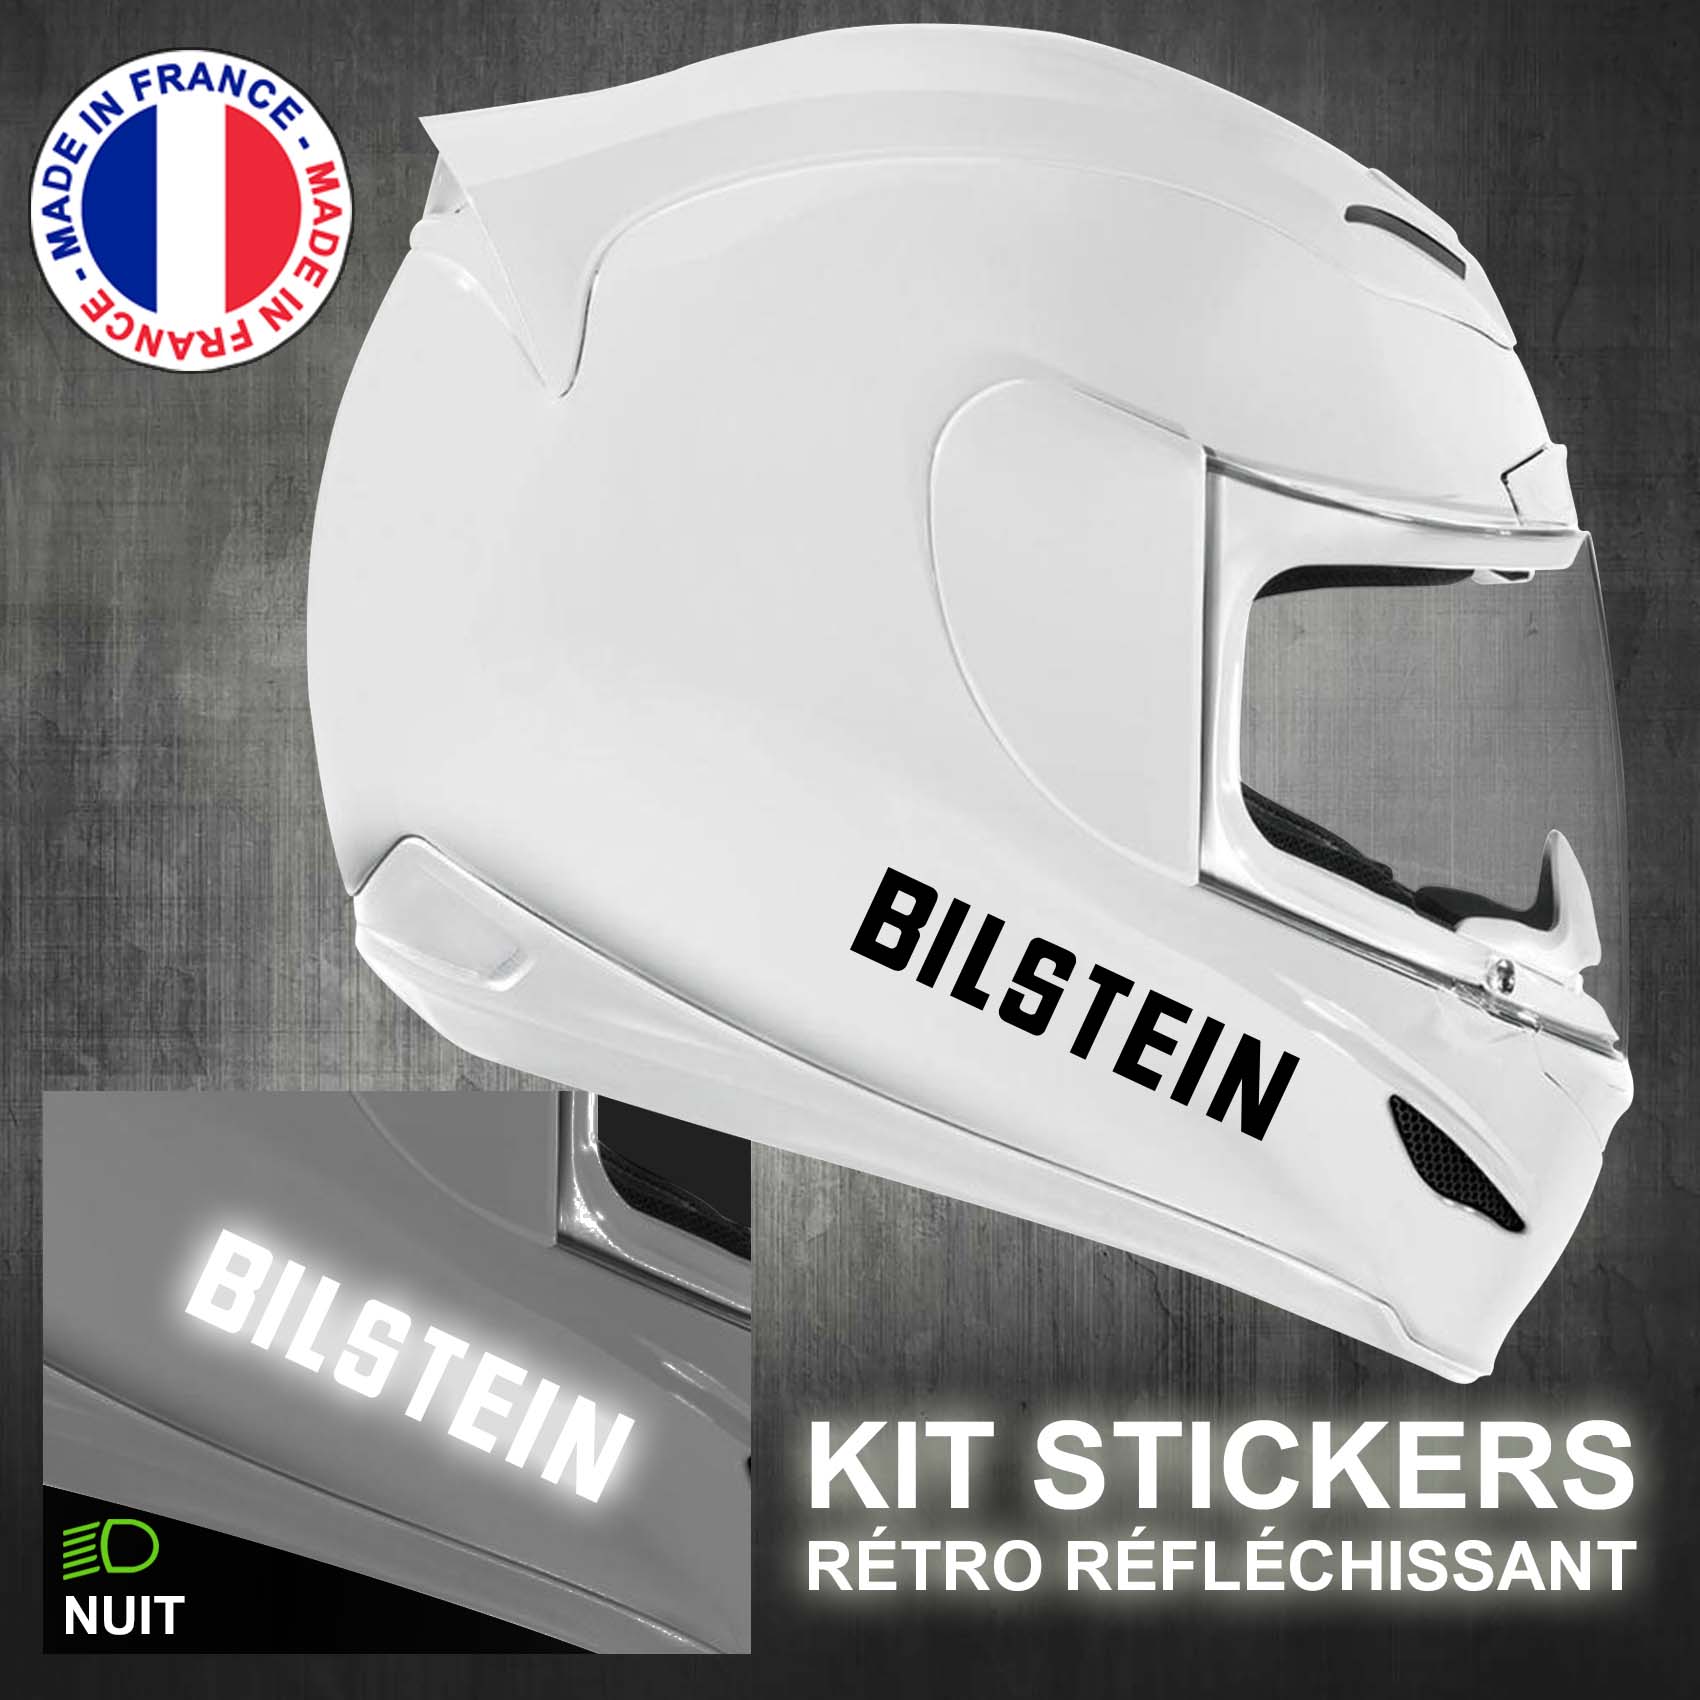 stickers-casque-moto-bilstein-ref1-retro-reflechissant-autocollant-moto-velo-tuning-racing-route-sticker-casques-adhesif-scooter-nuit-securite-decals-personnalise-personnalisable-min